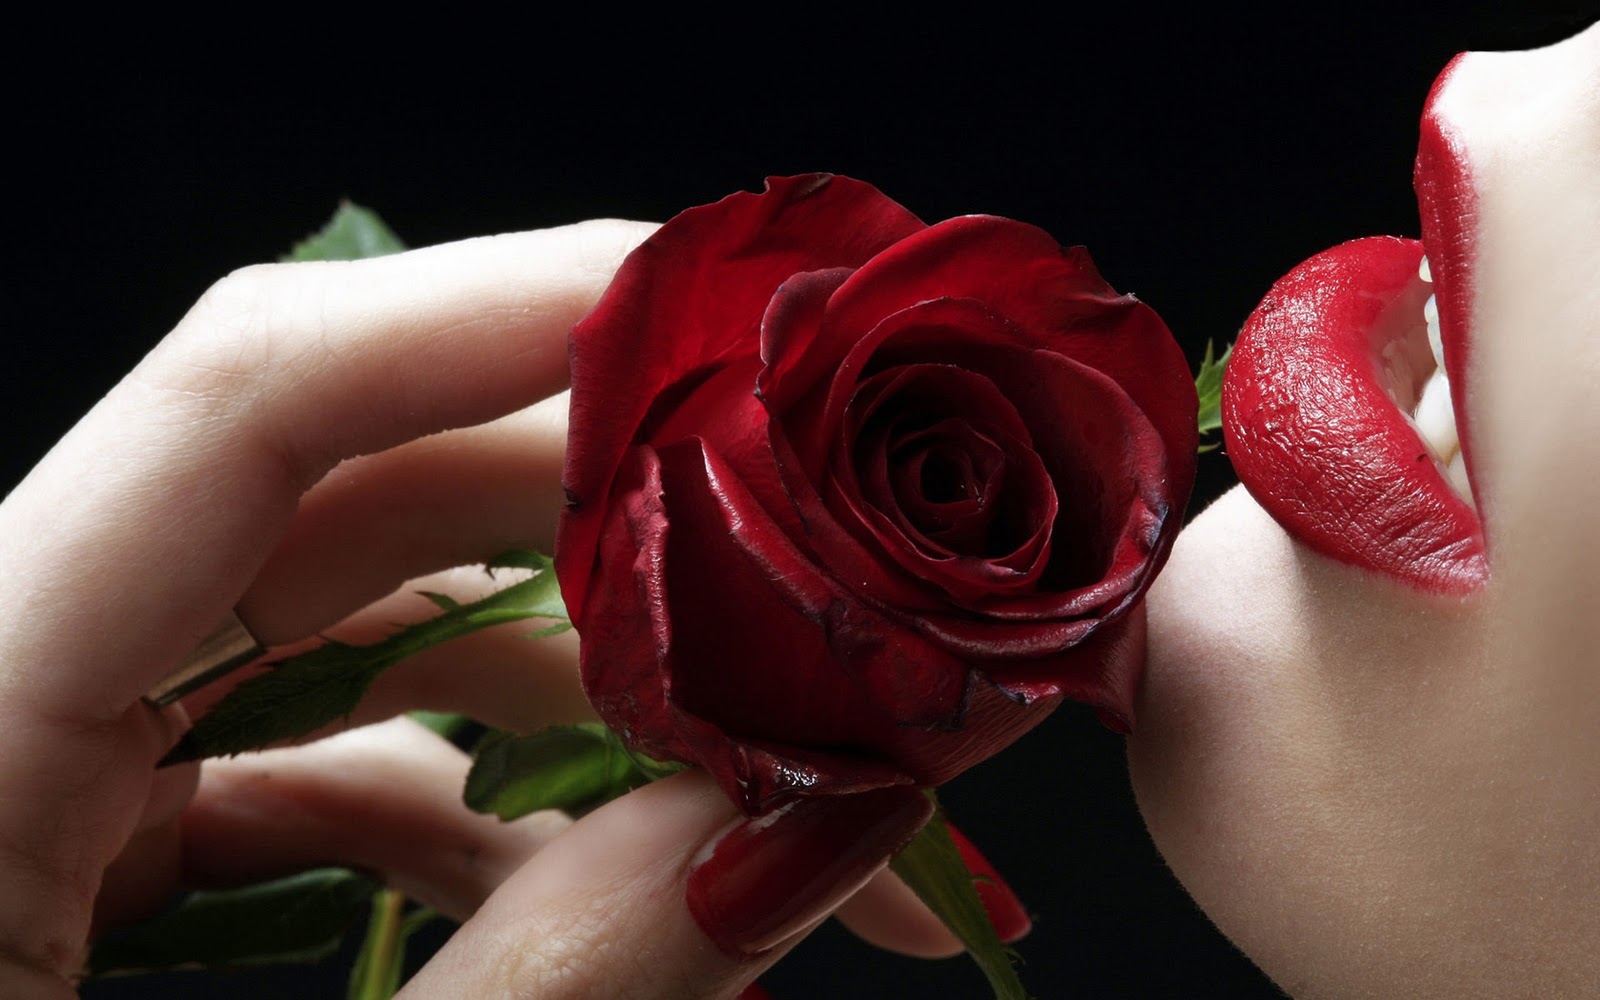 Red rose larest hd kissing photo download Daily pics update HD